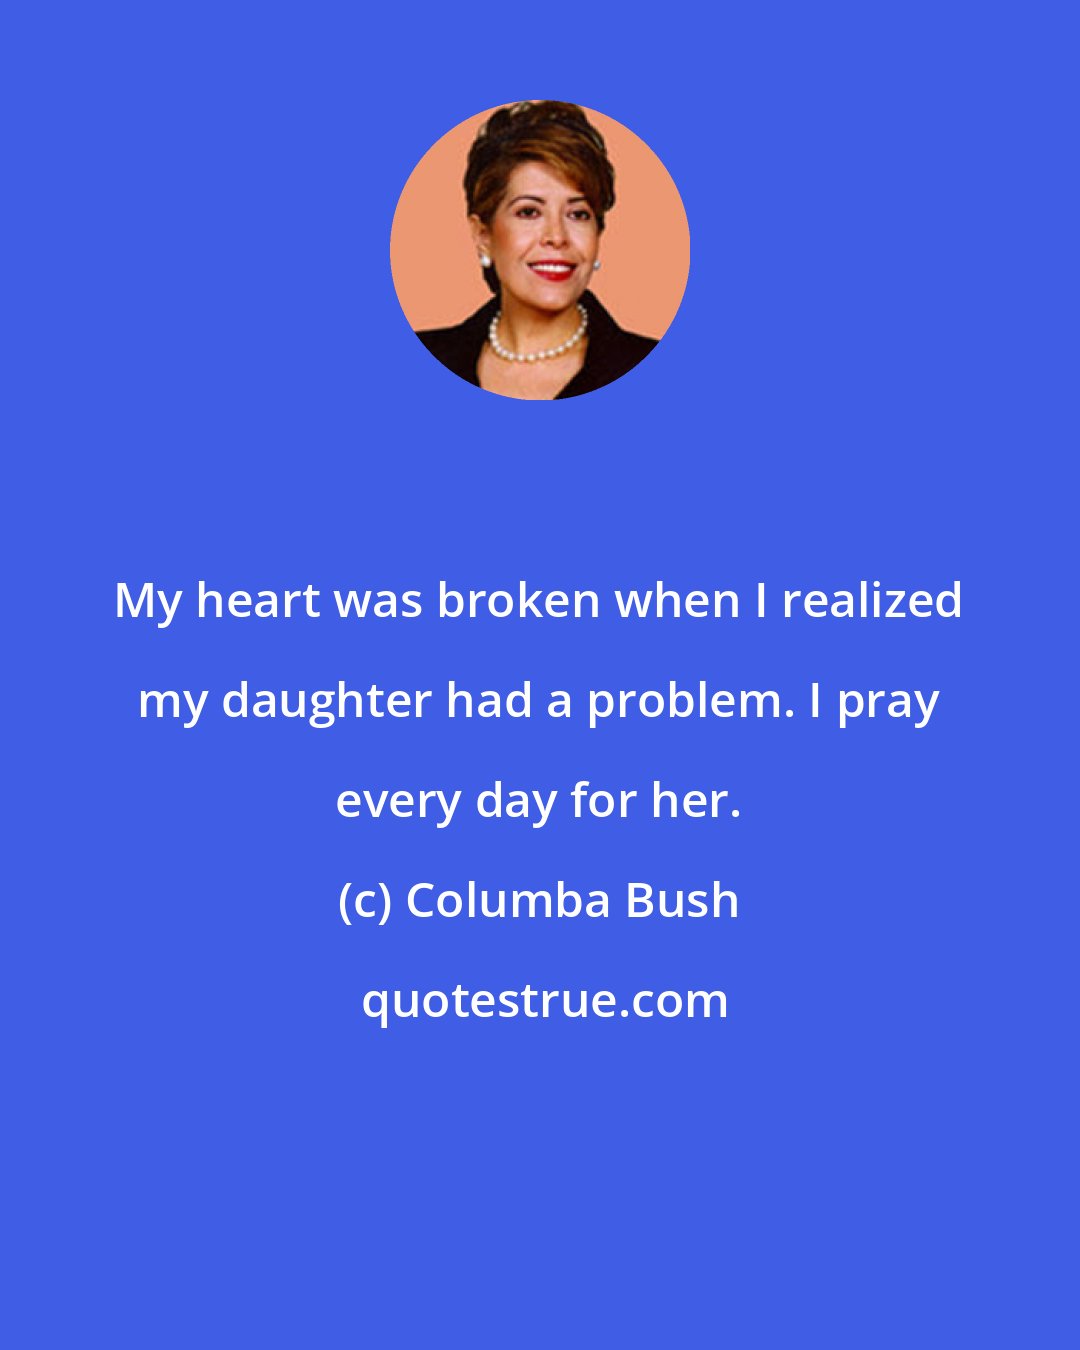 Columba Bush: My heart was broken when I realized my daughter had a problem. I pray every day for her.